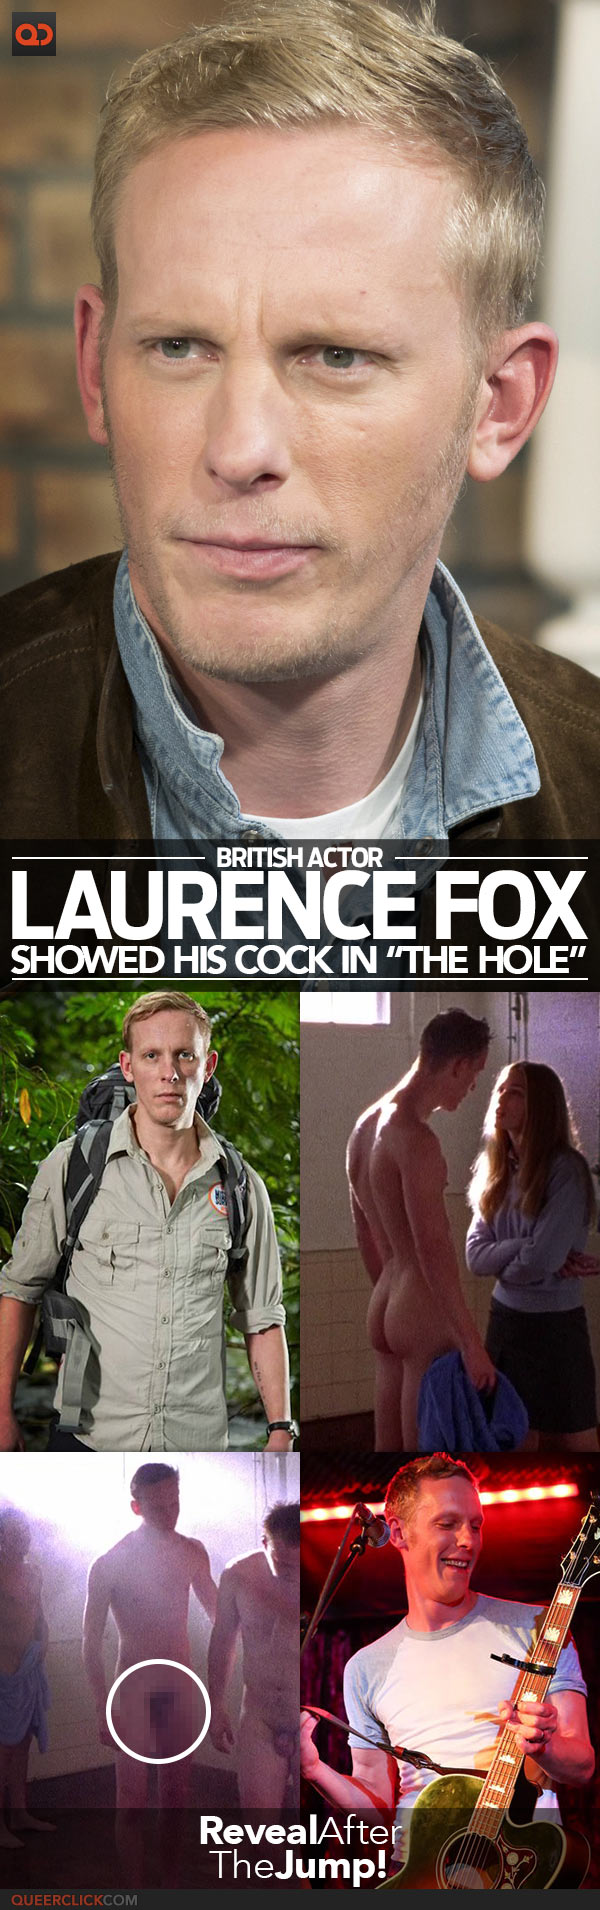 qc-exposed-celebs-lawrence_fox_showed_his_cock_in_the_hole-teaser